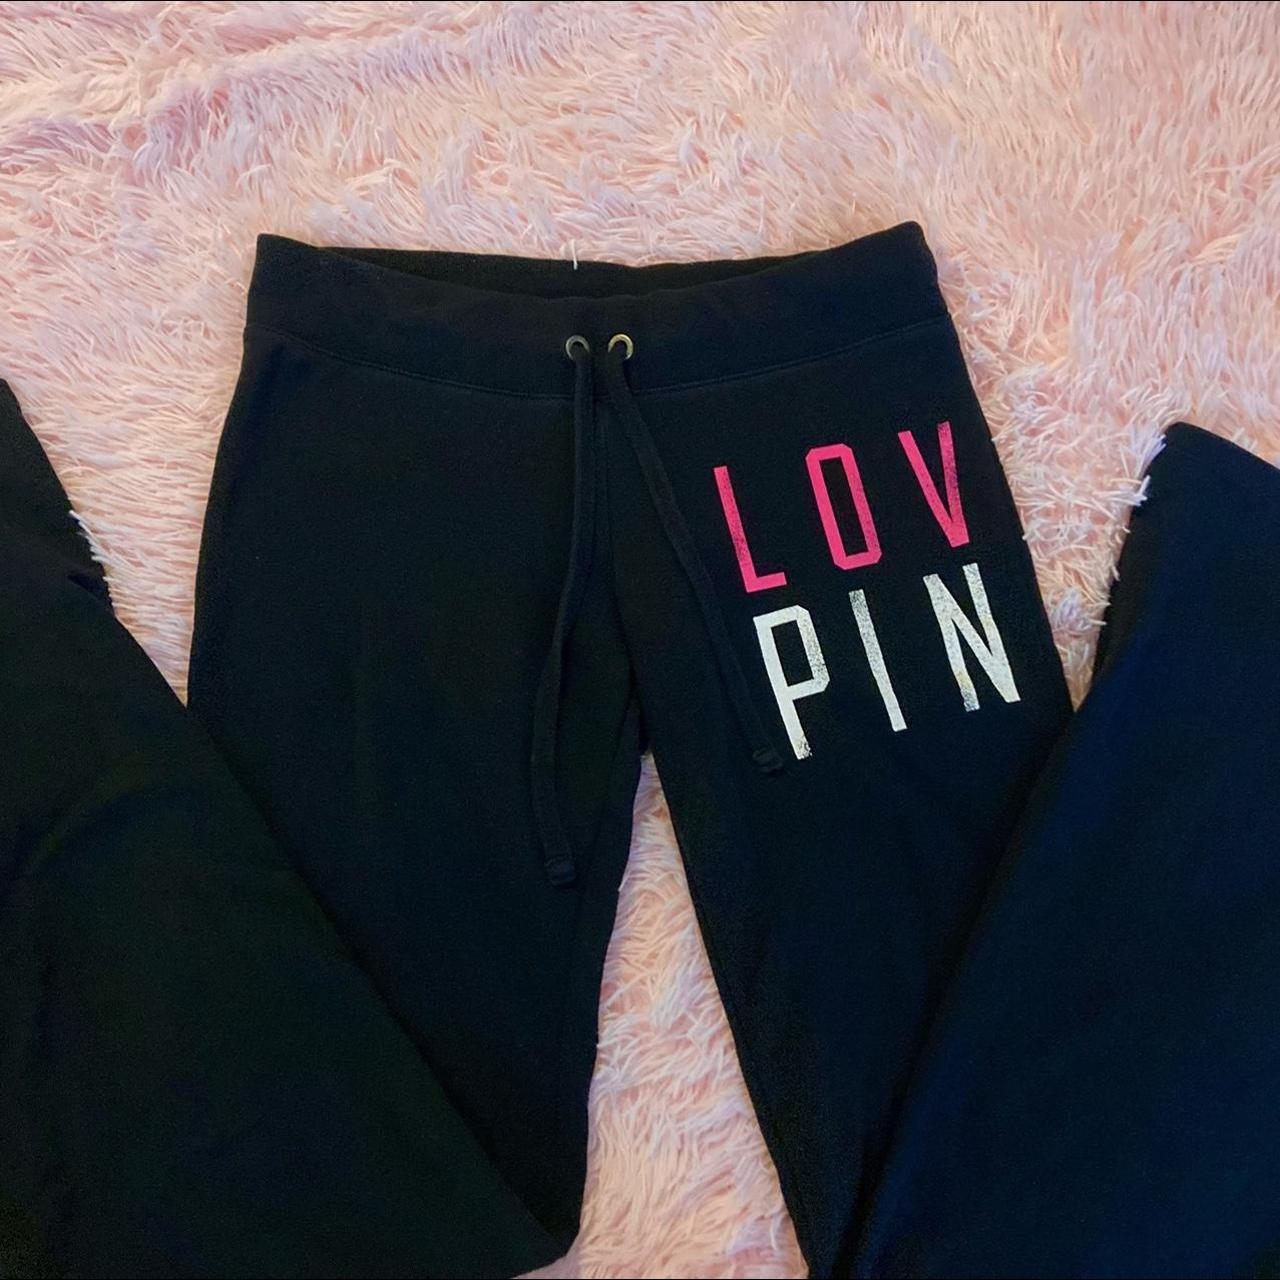 Victoria's Secret: 2 Pairs of Yoga Pants $39.98 Shipped & More (Plus, Earn  4% Cash Back from ShopAtHome)